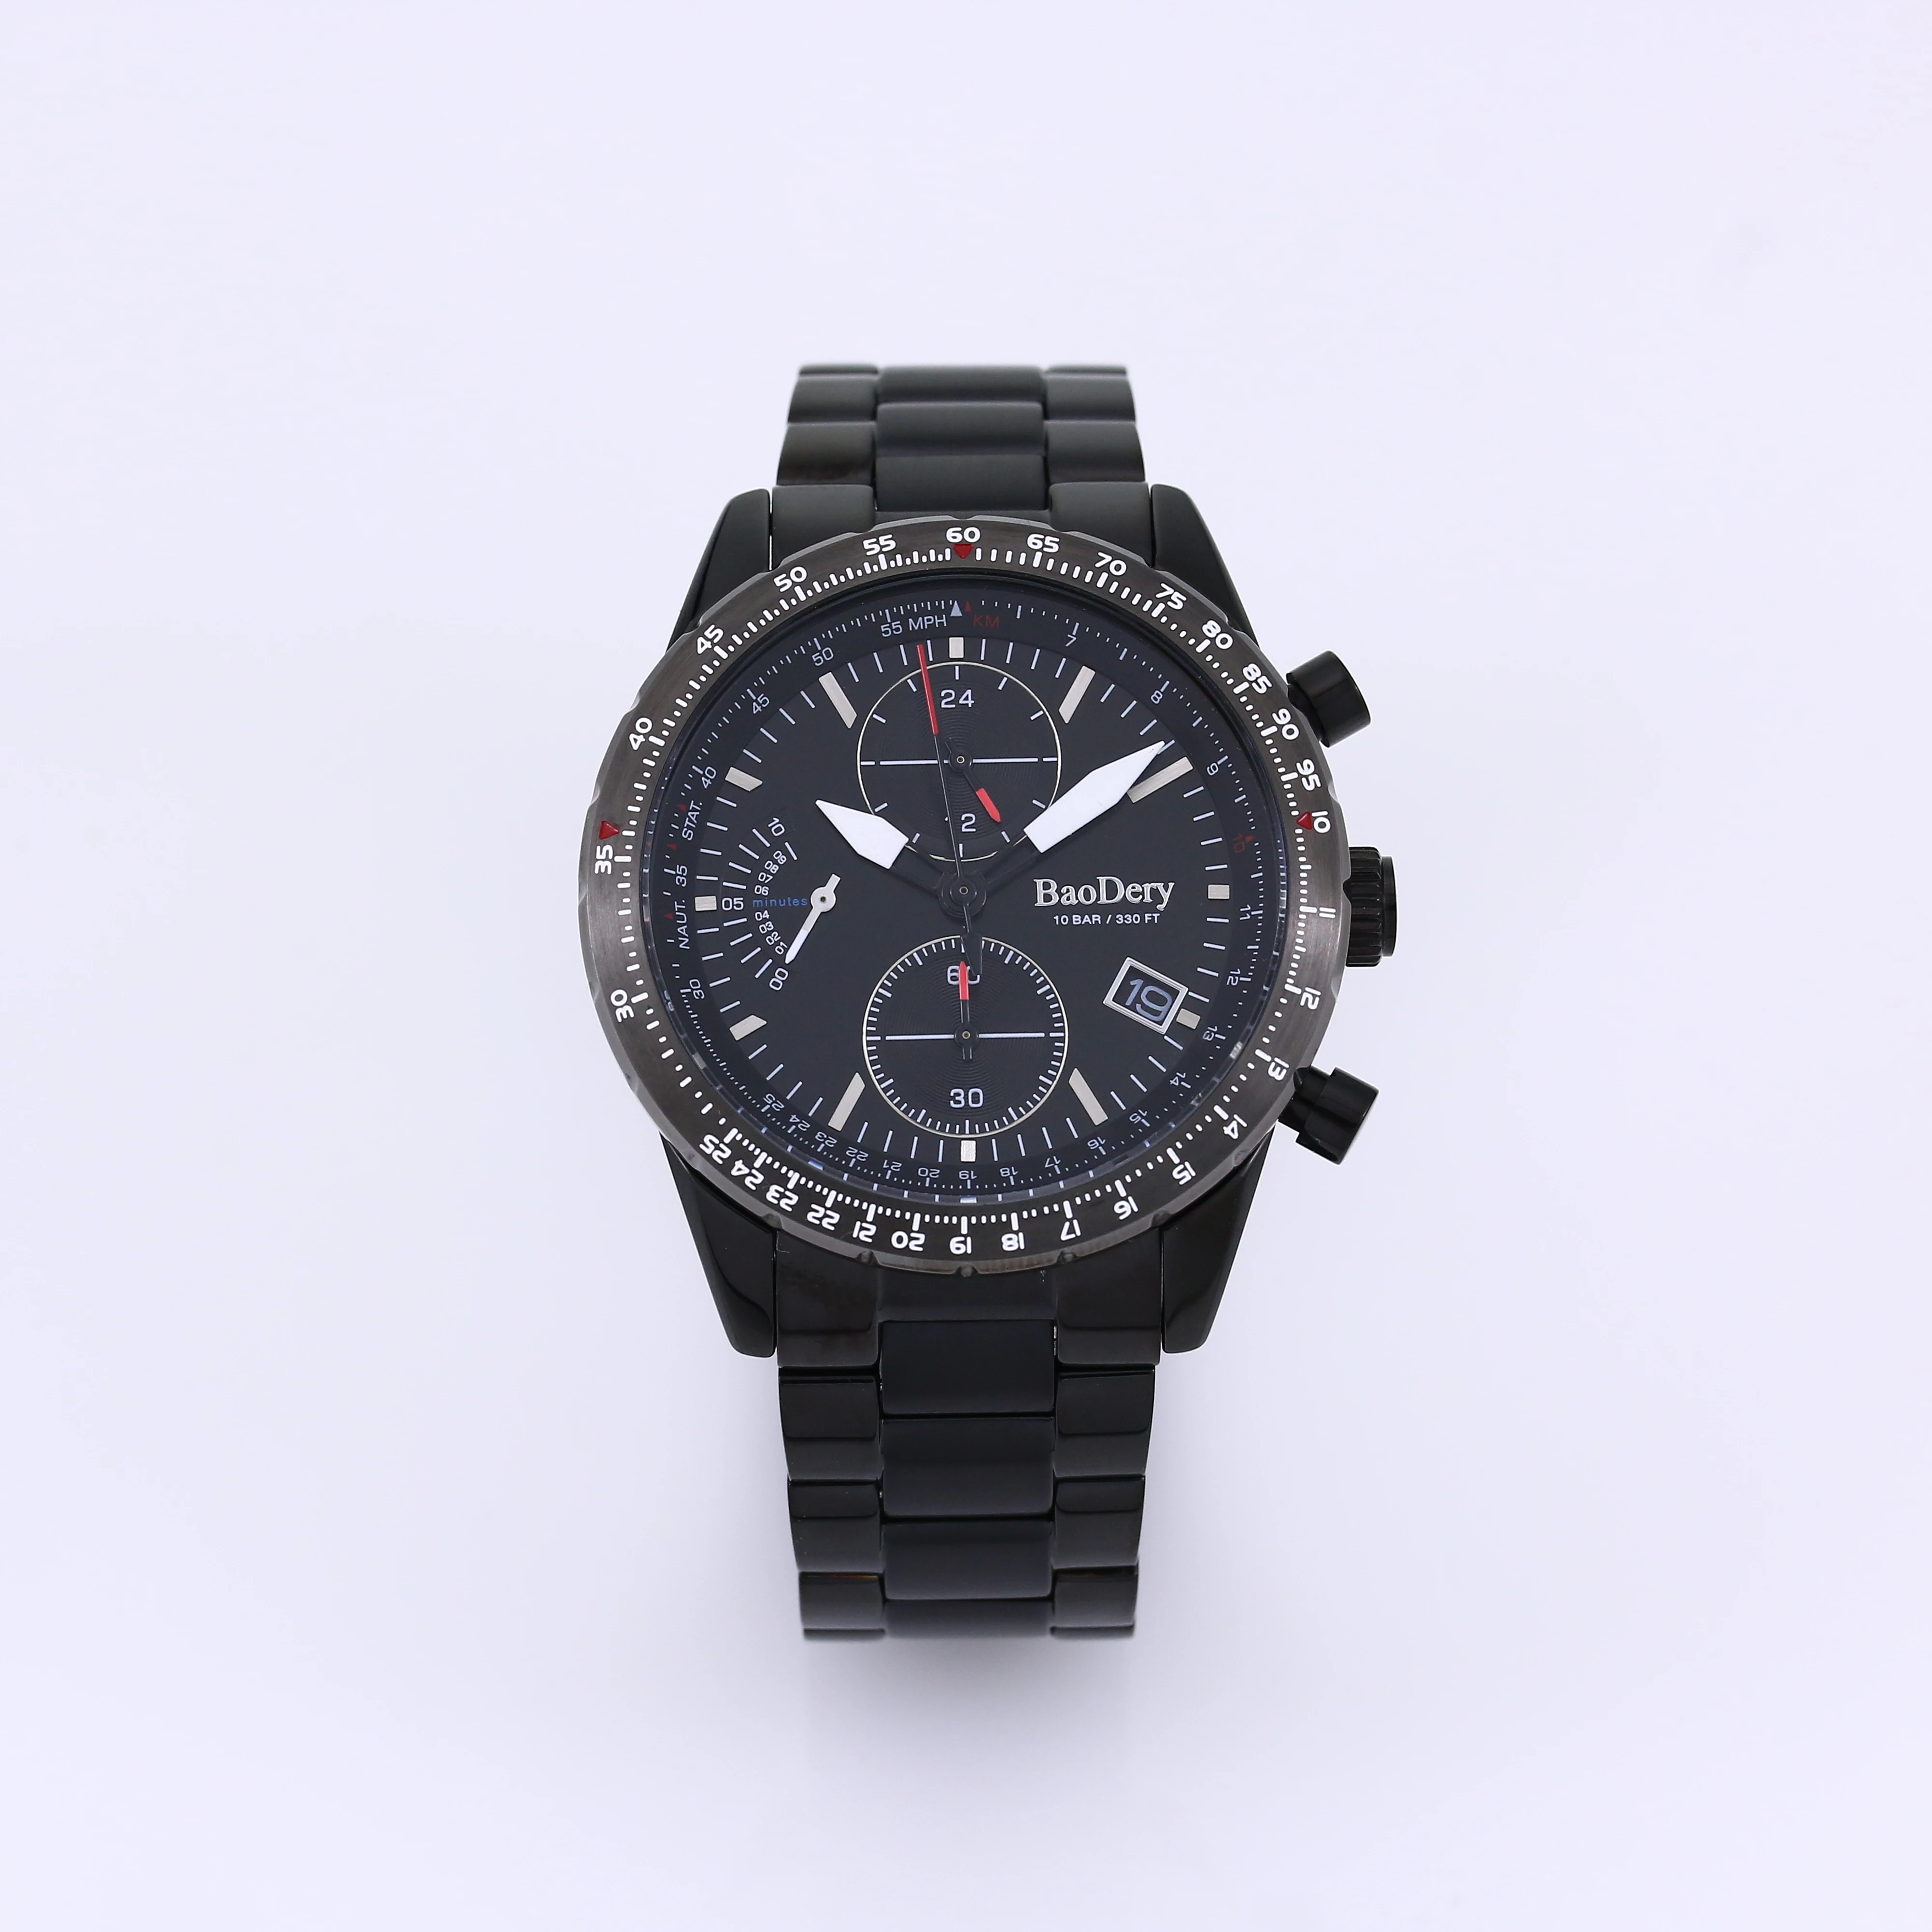 Optimize Your Time in Sporty-Chic Style - The 46mm Black Chronograph Watch with Day, Date and 24H Indicators!